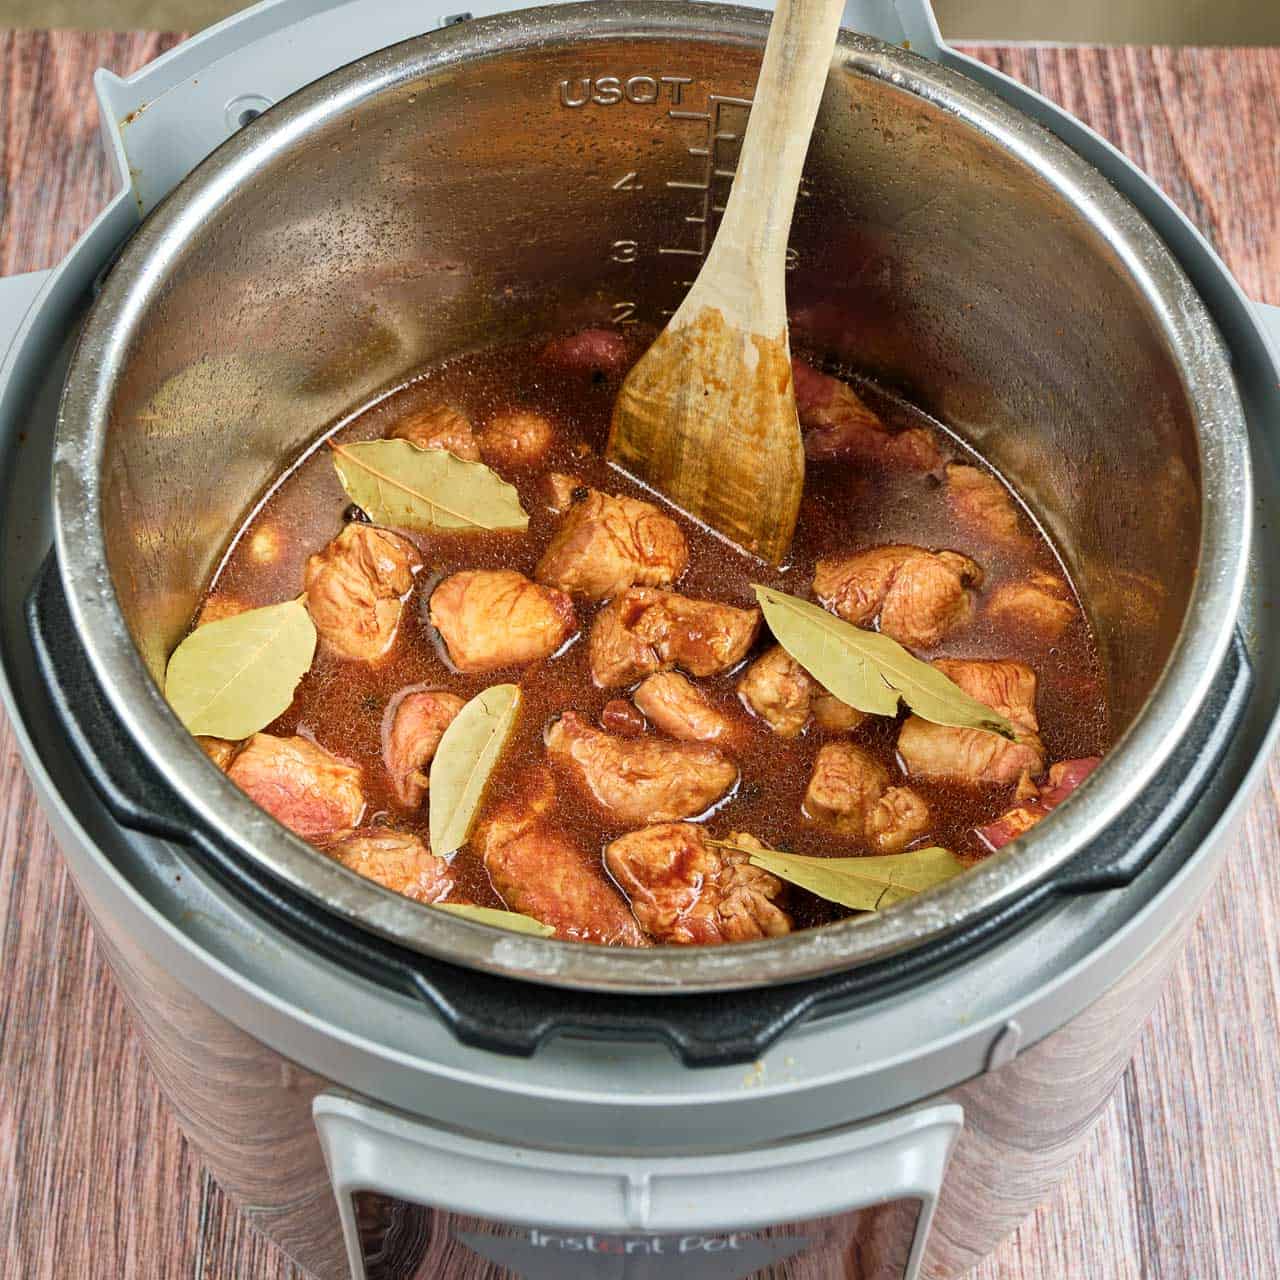 An Instant Pot full of pork, soy sauce, and bay leaves